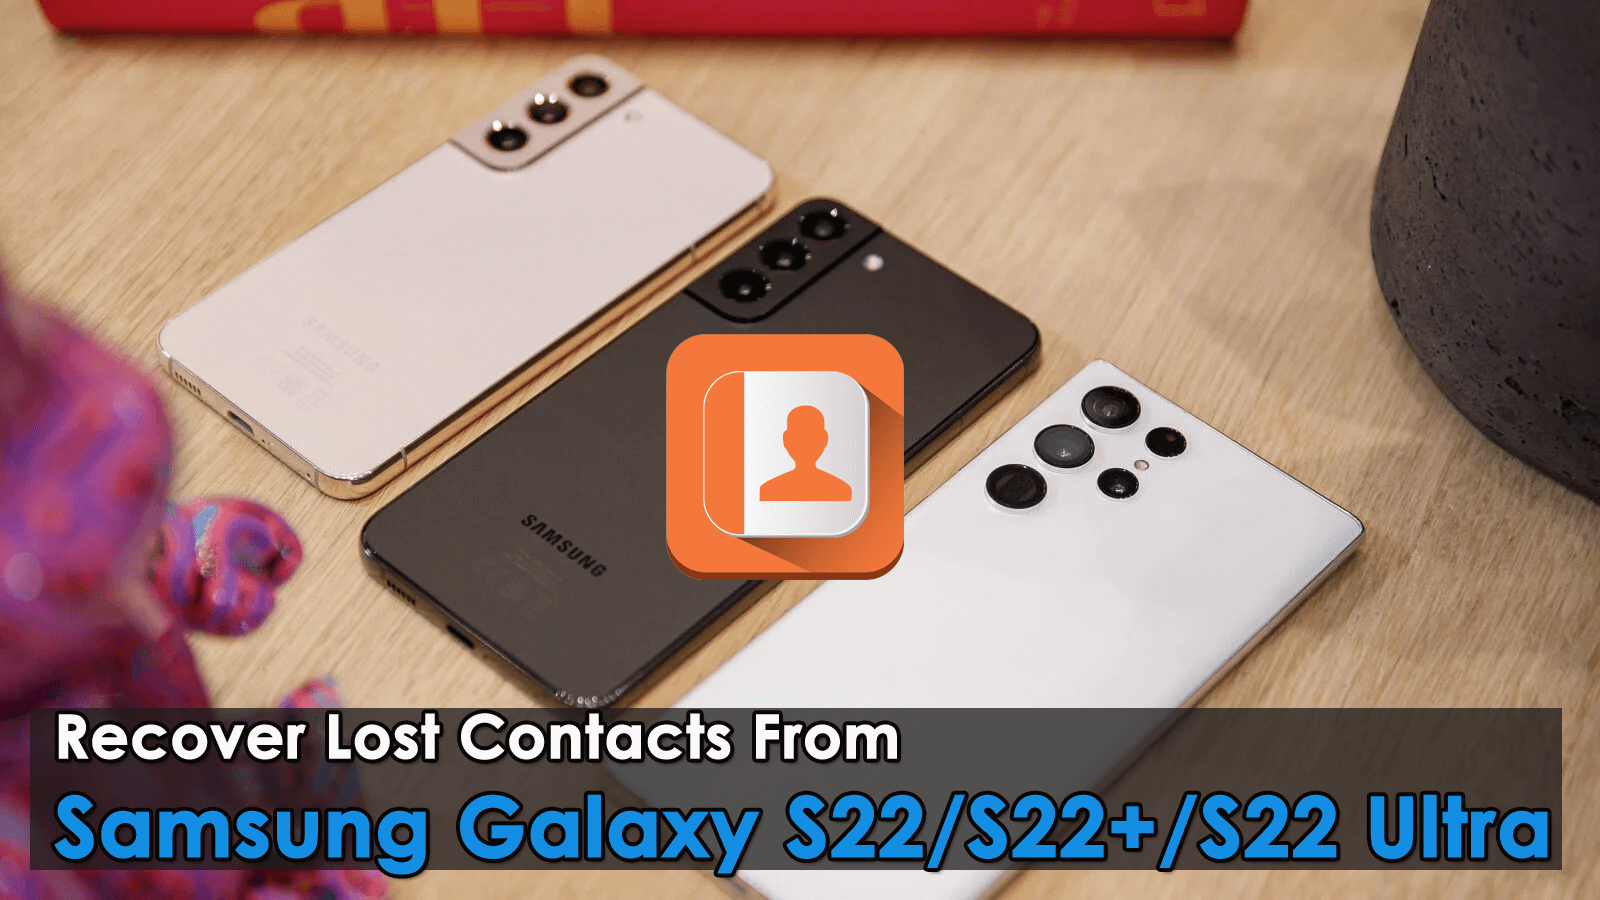 Recover Lost Contacts From Samsung Galaxy S22